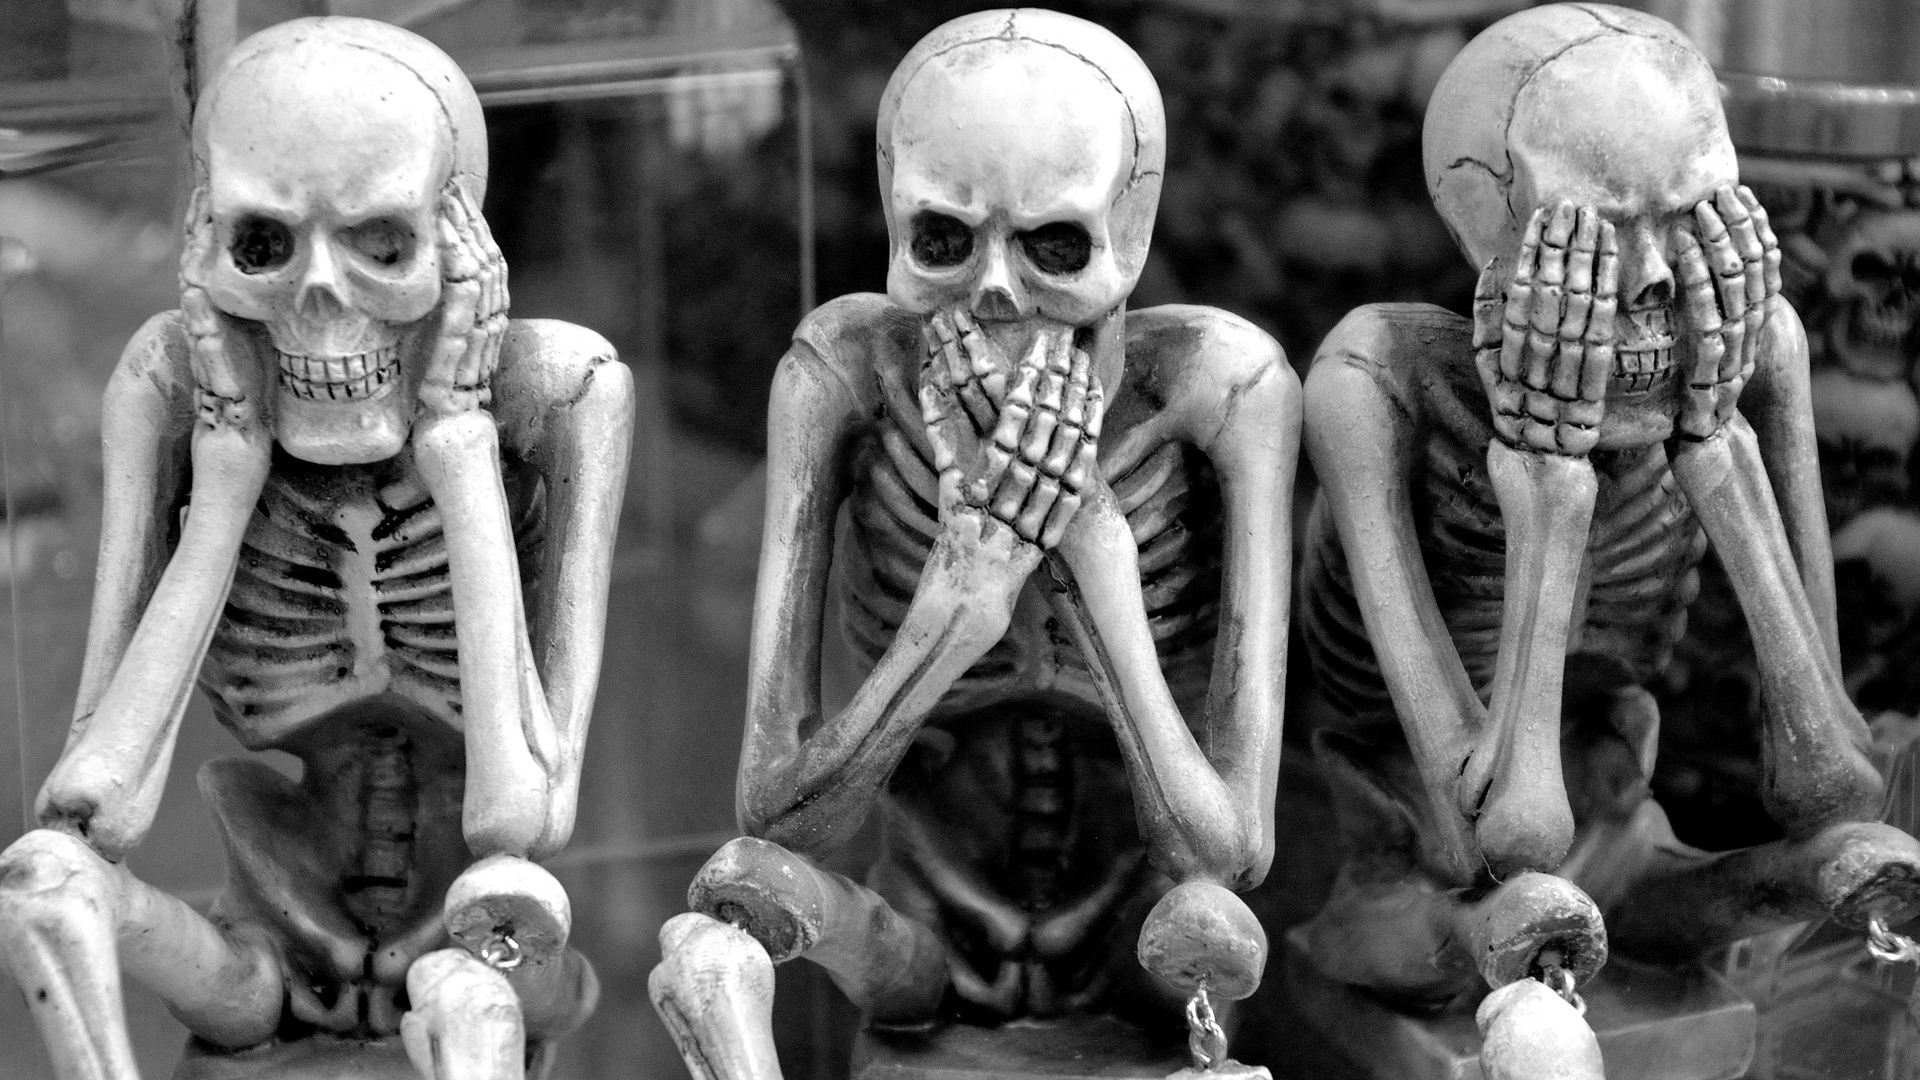 3 fake skeletons in black and white. Hear, speak and see no evil.